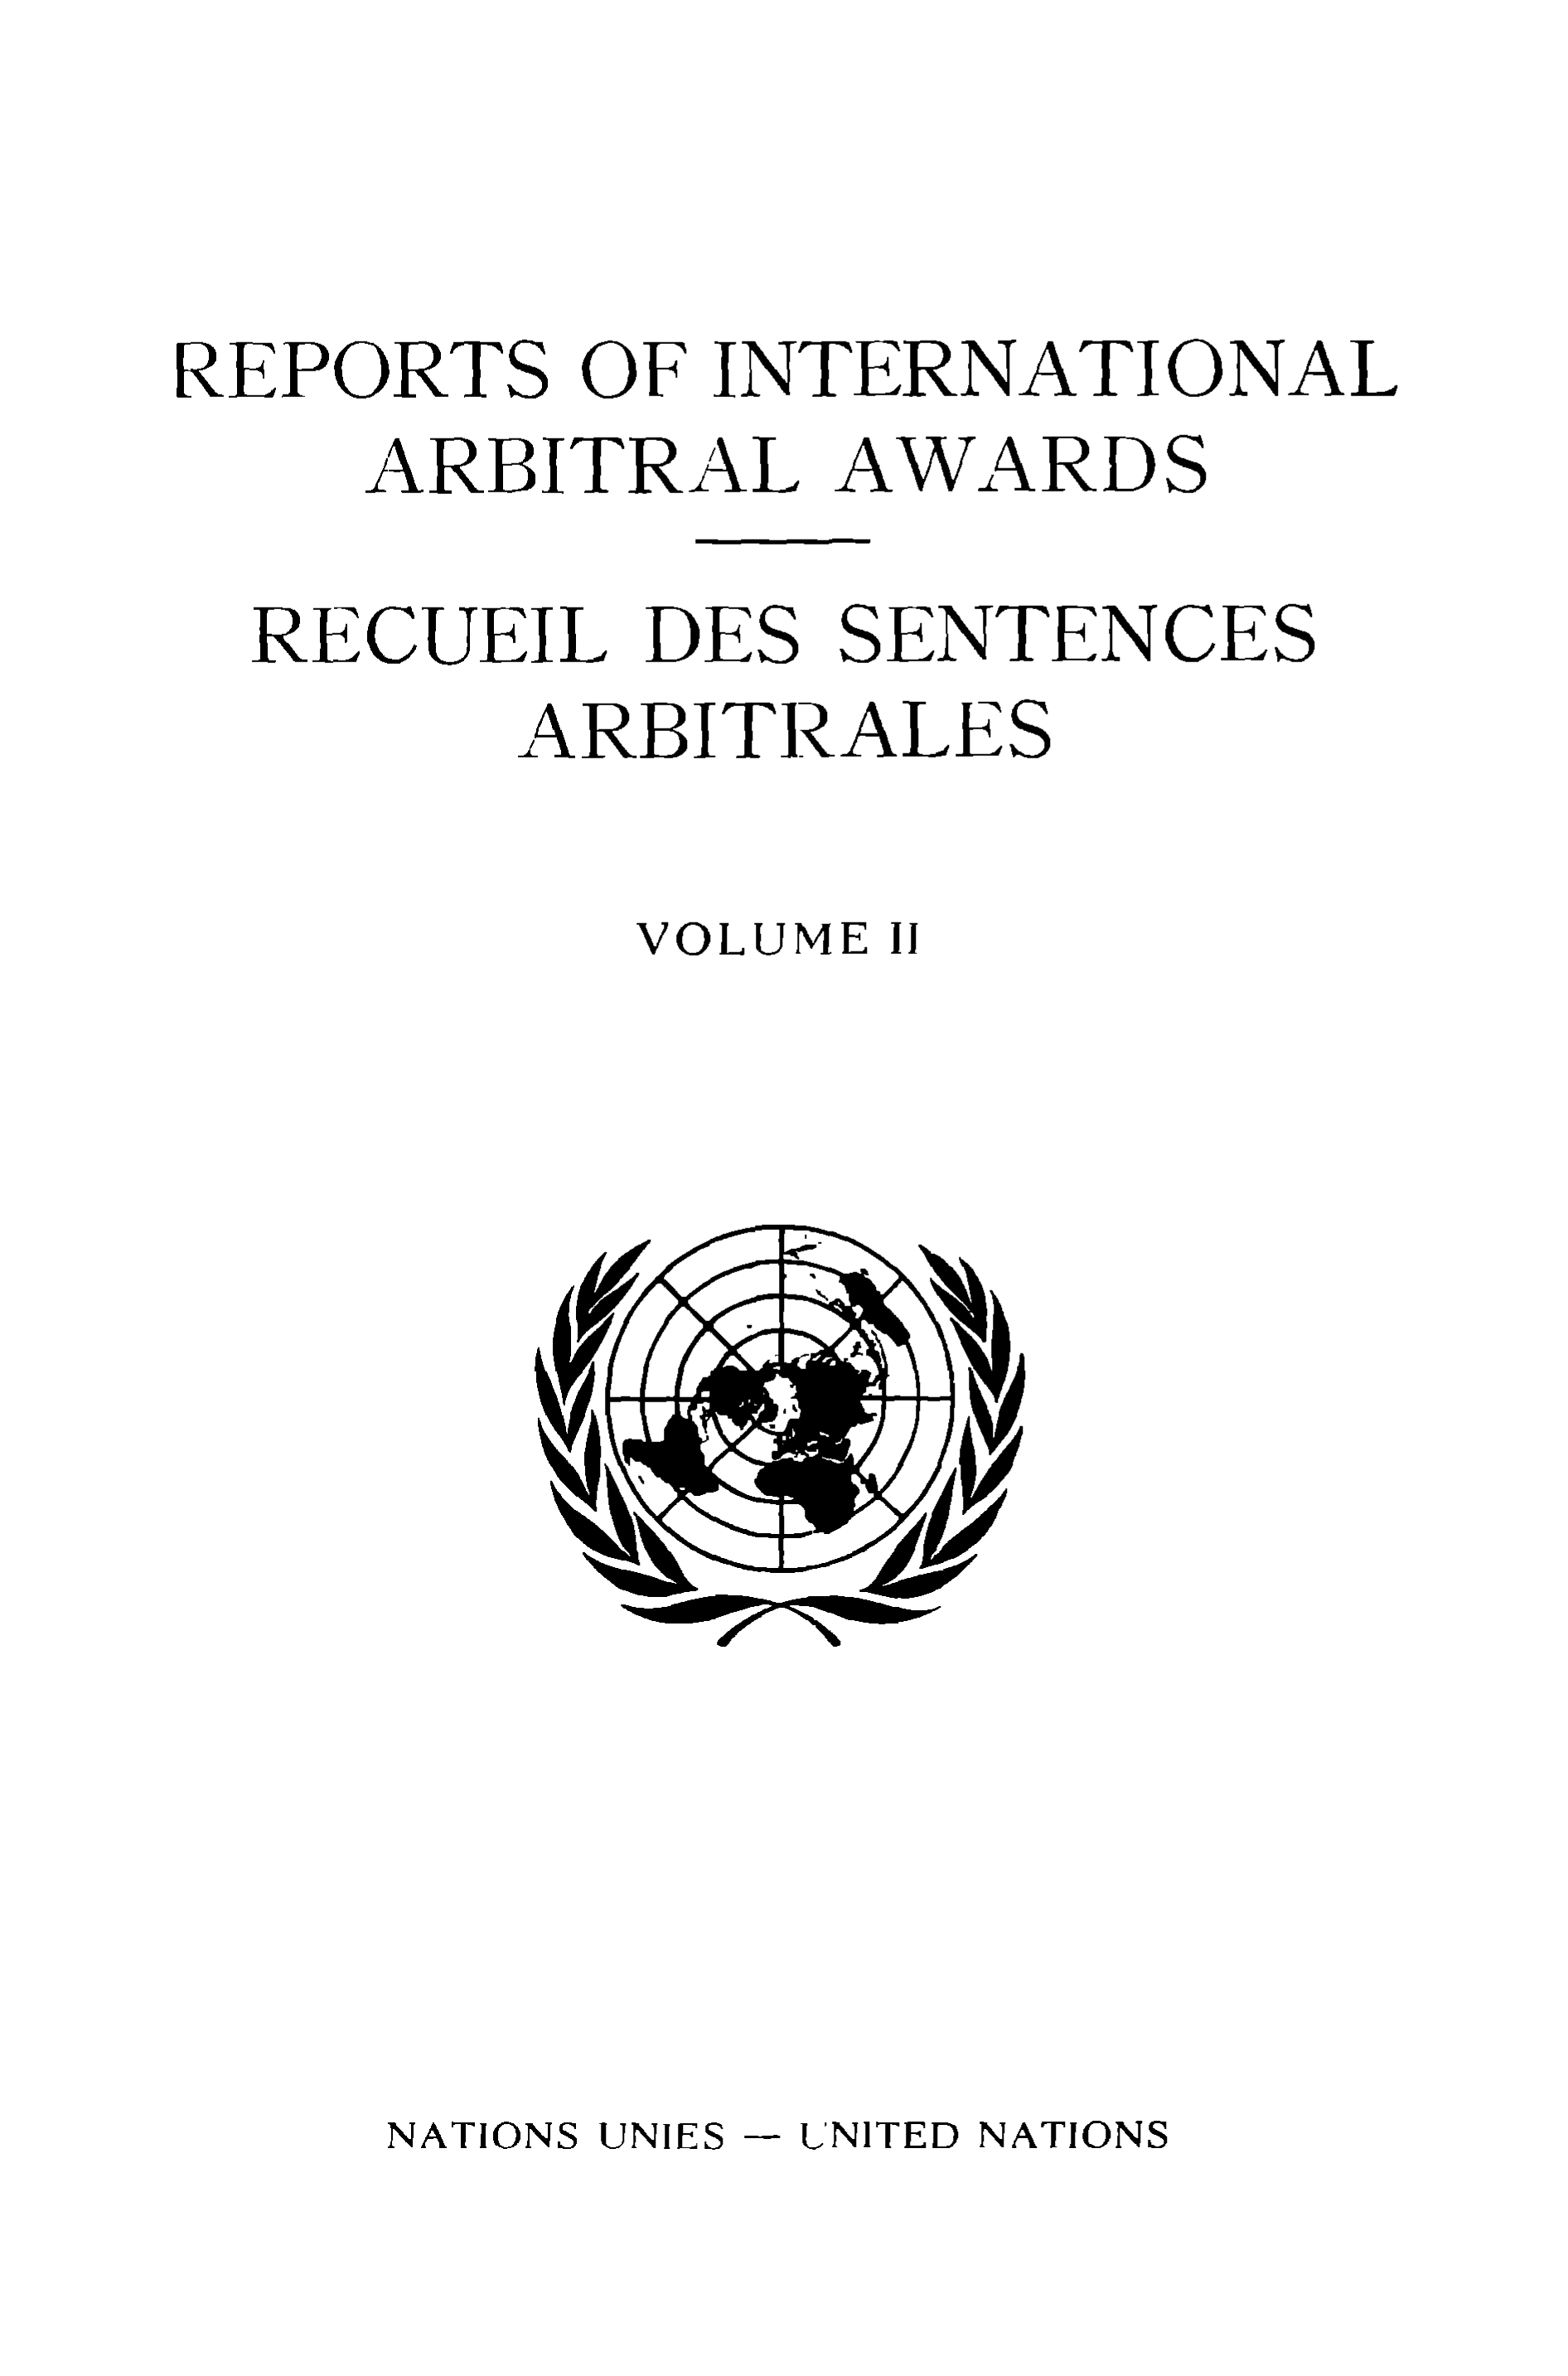 image of Reports of International Arbitral Awards, Vol. II